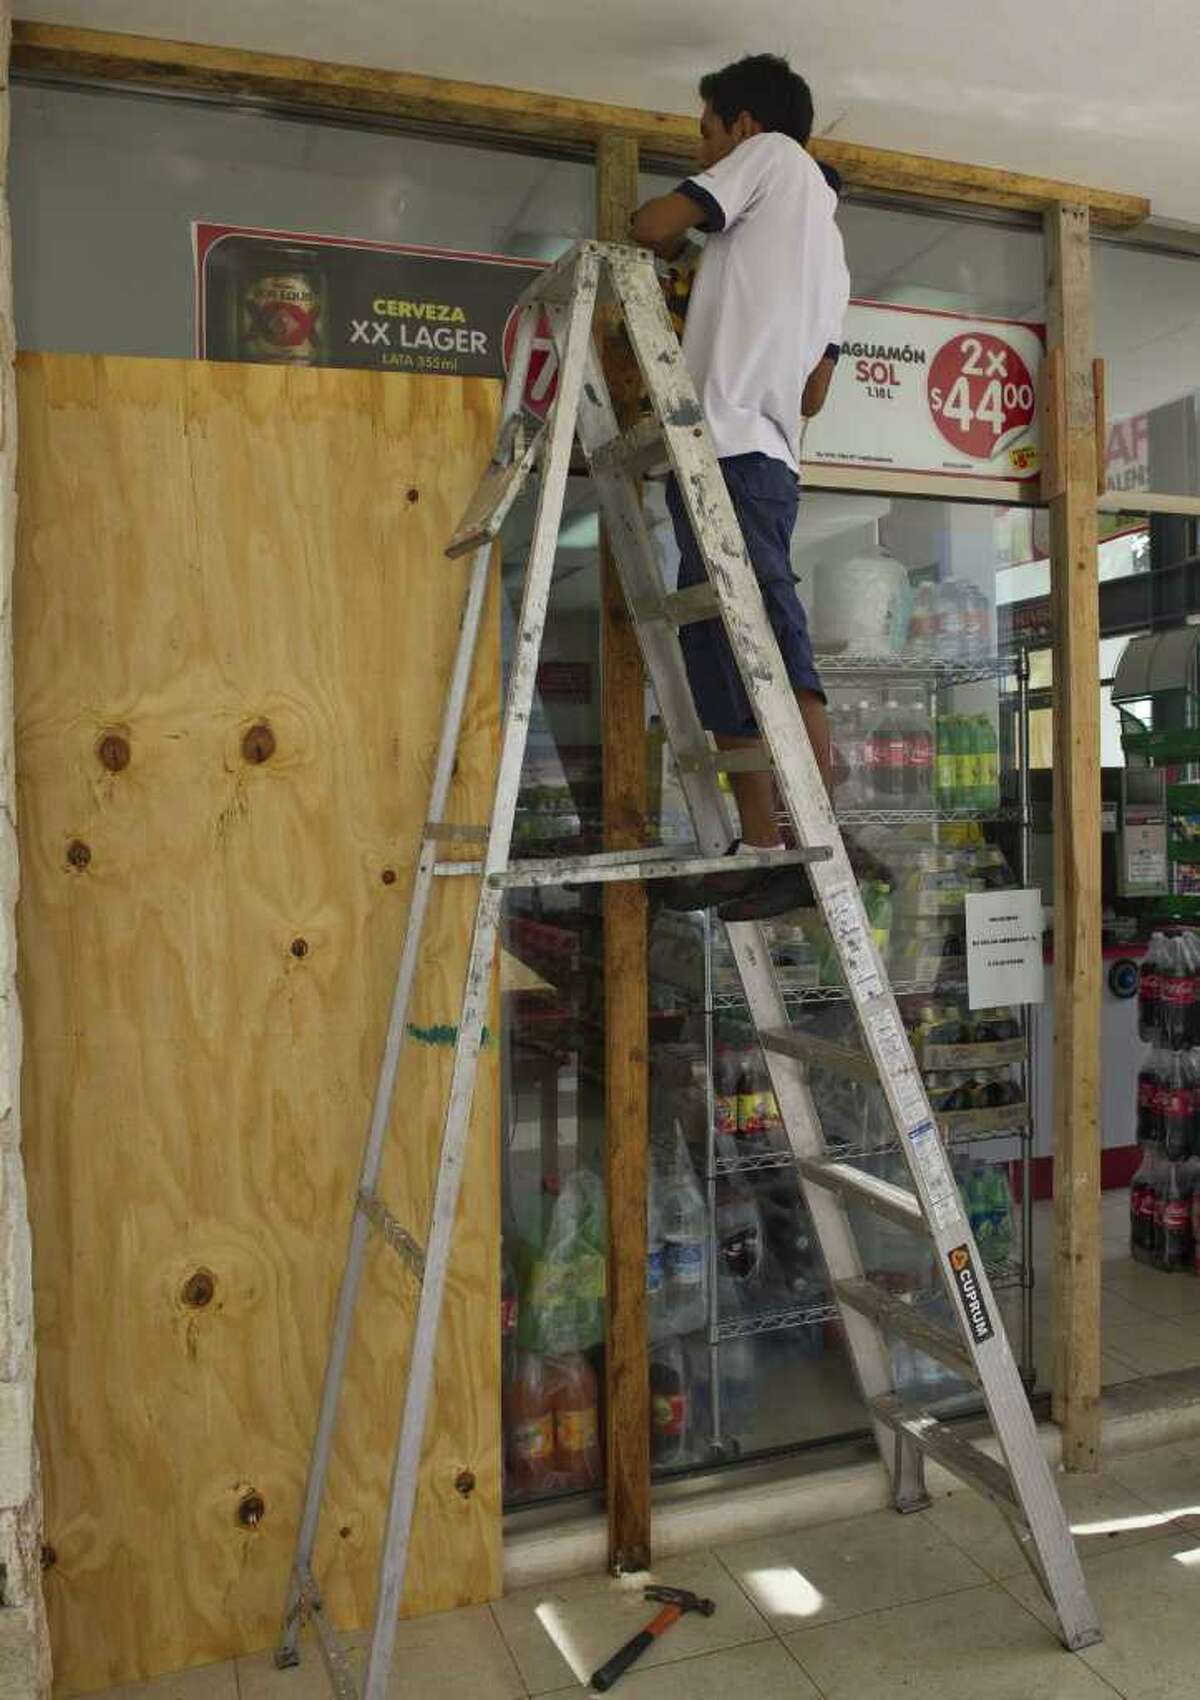 Ronaldo Schemidt : AFP/Getty Images BOARDING UP: Workers in Playa del Carmen cover windows Wednesday as Hurricane Rina targets the Mexican coast.